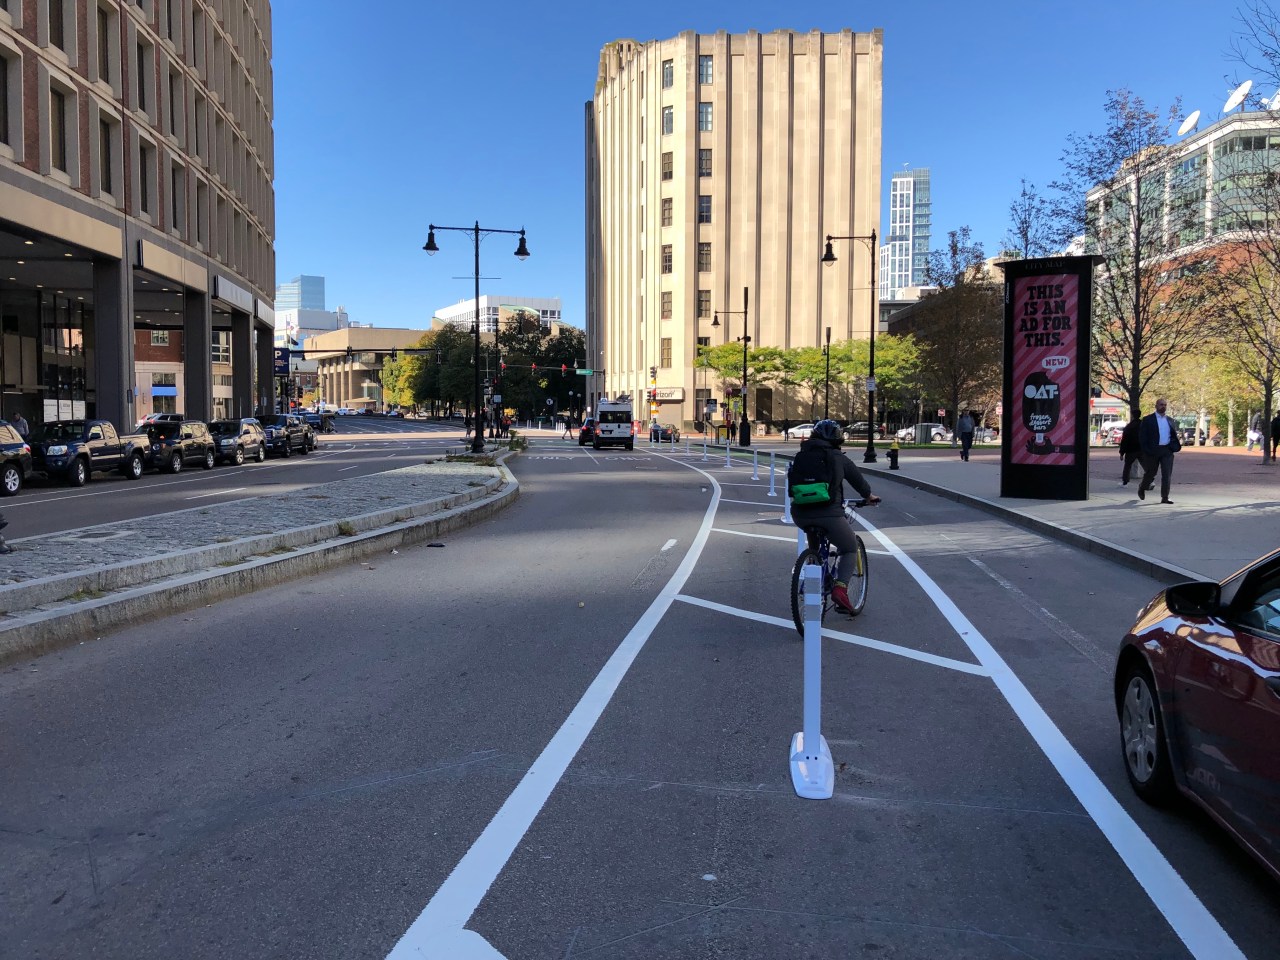 A bicycle user enters a bike lane in front of an illegally-parked car along City Hall Plaza in downtown Boston next to an otherwise-empty street. In the distance, two cars wait an a red traffic light.